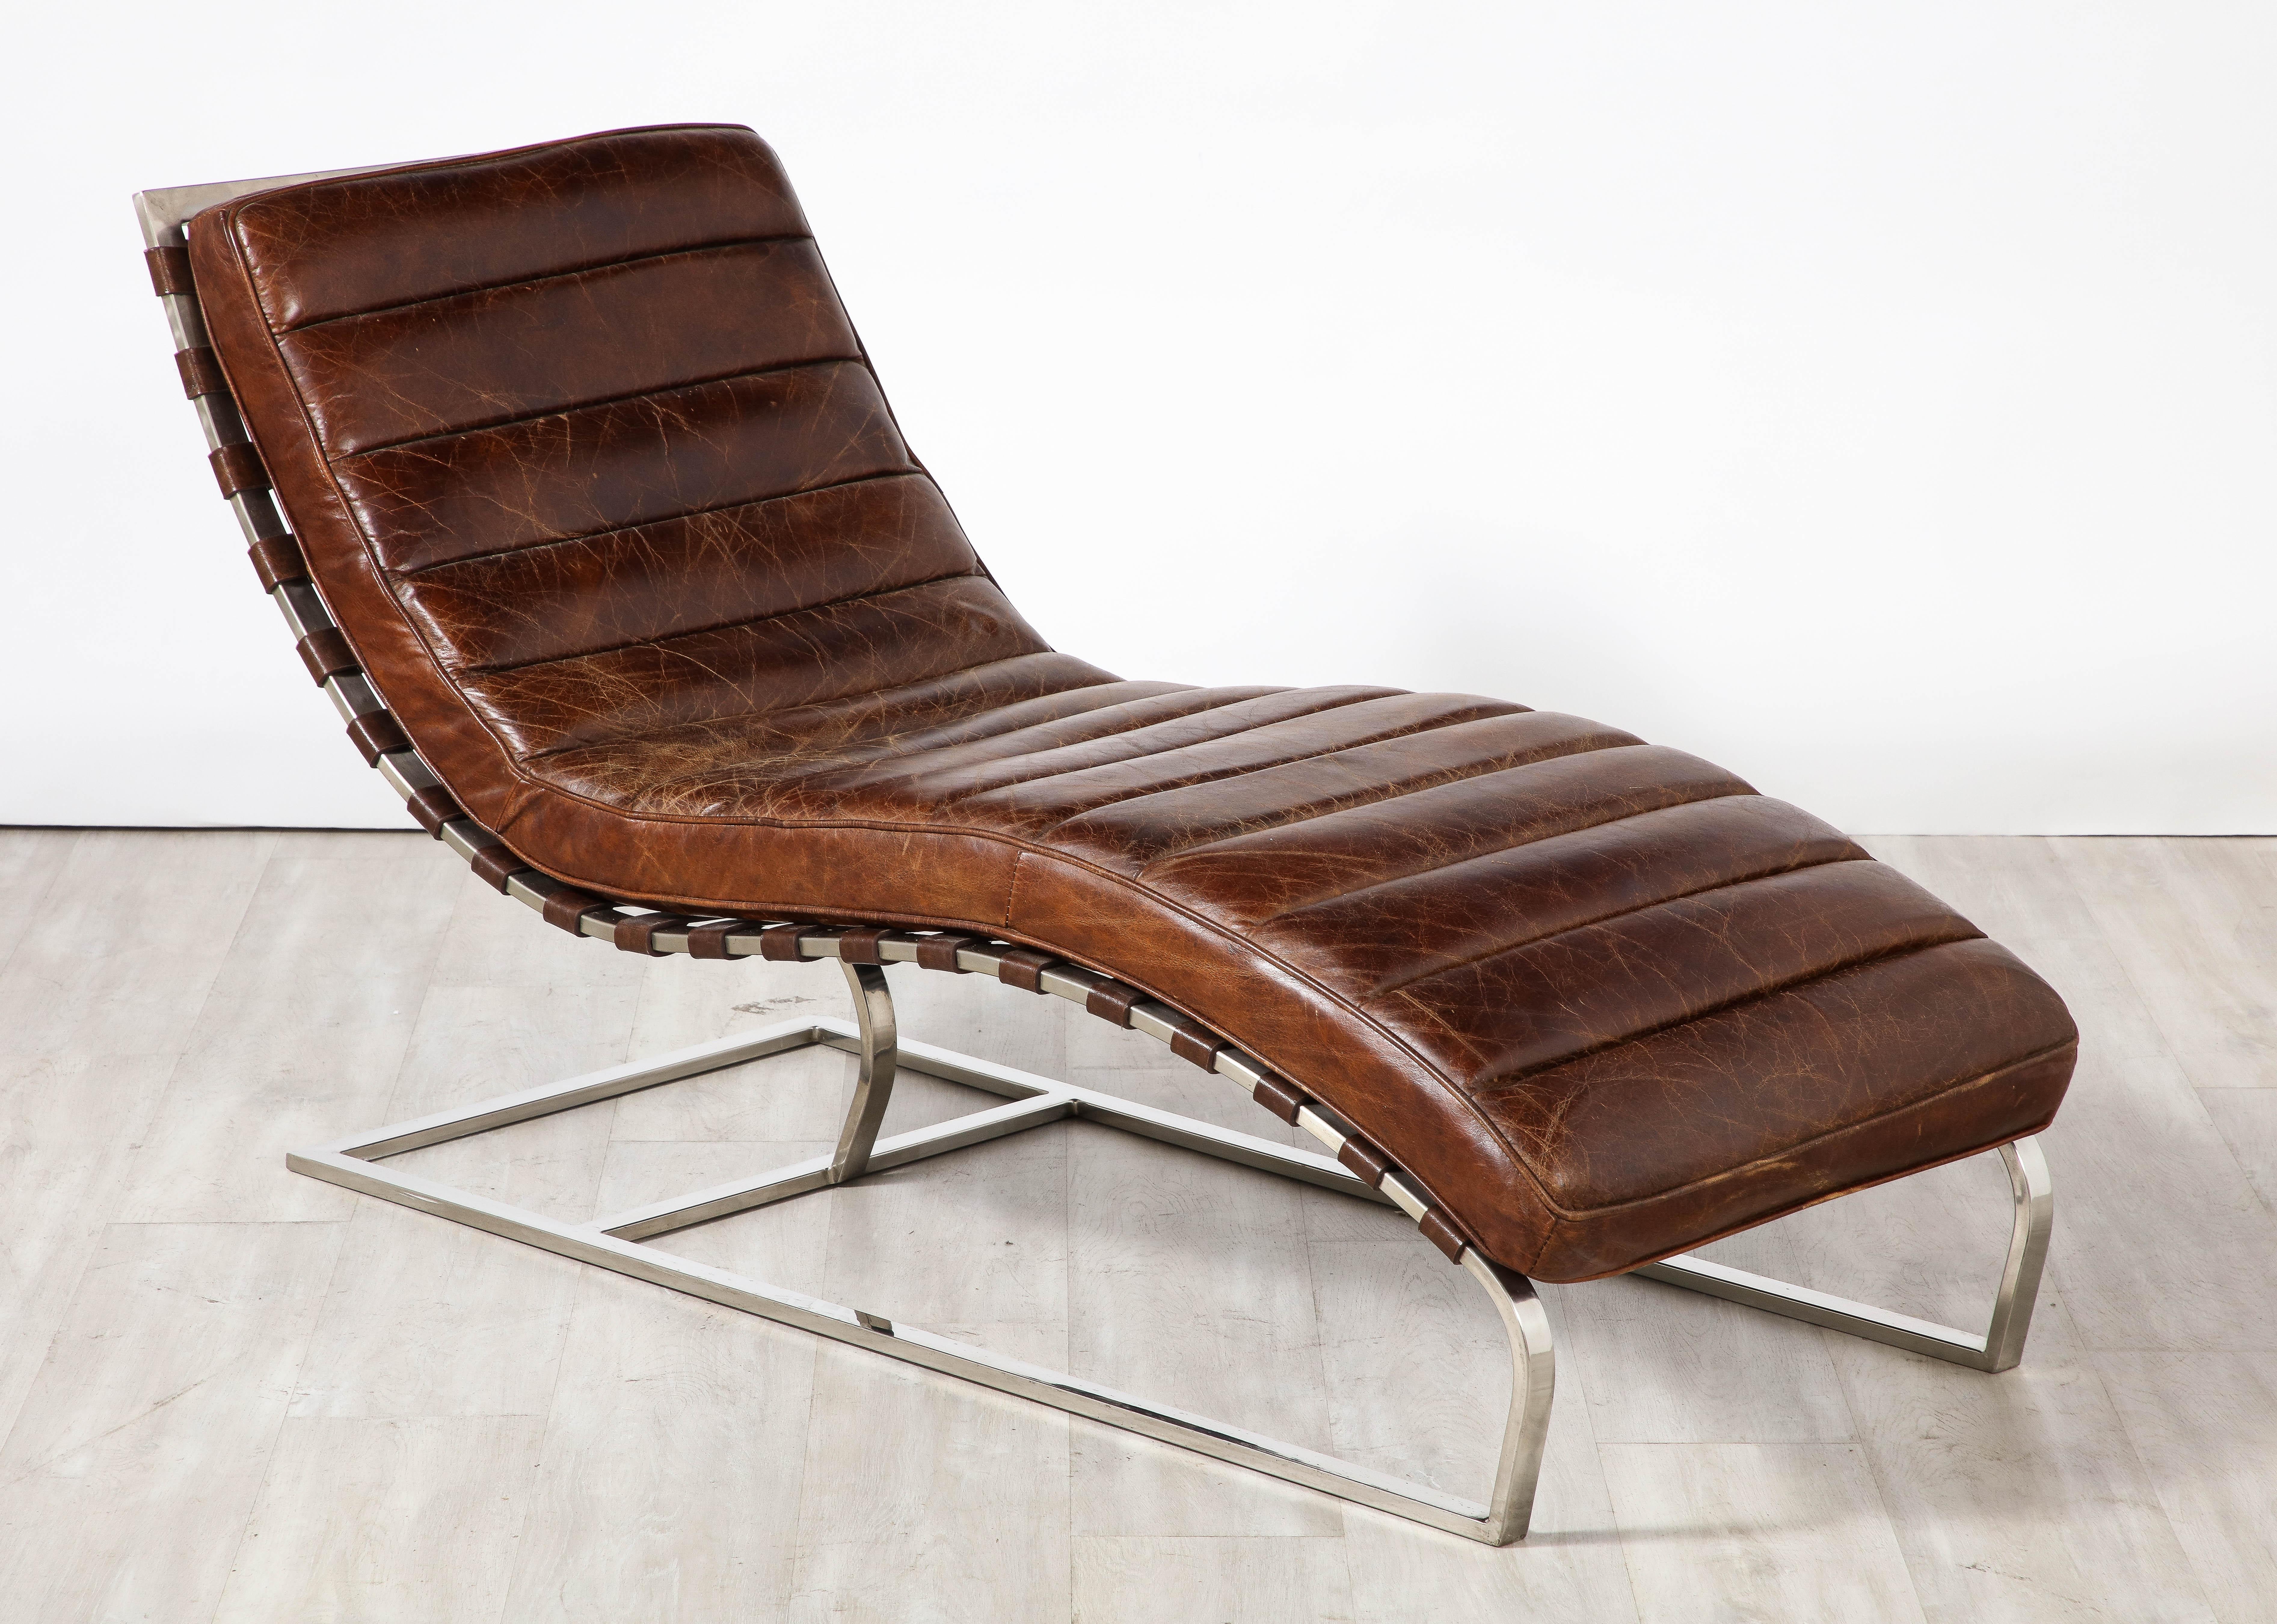 Italian Channeled Leather and Chrome Chaise Longue, 1970 For Sale 5